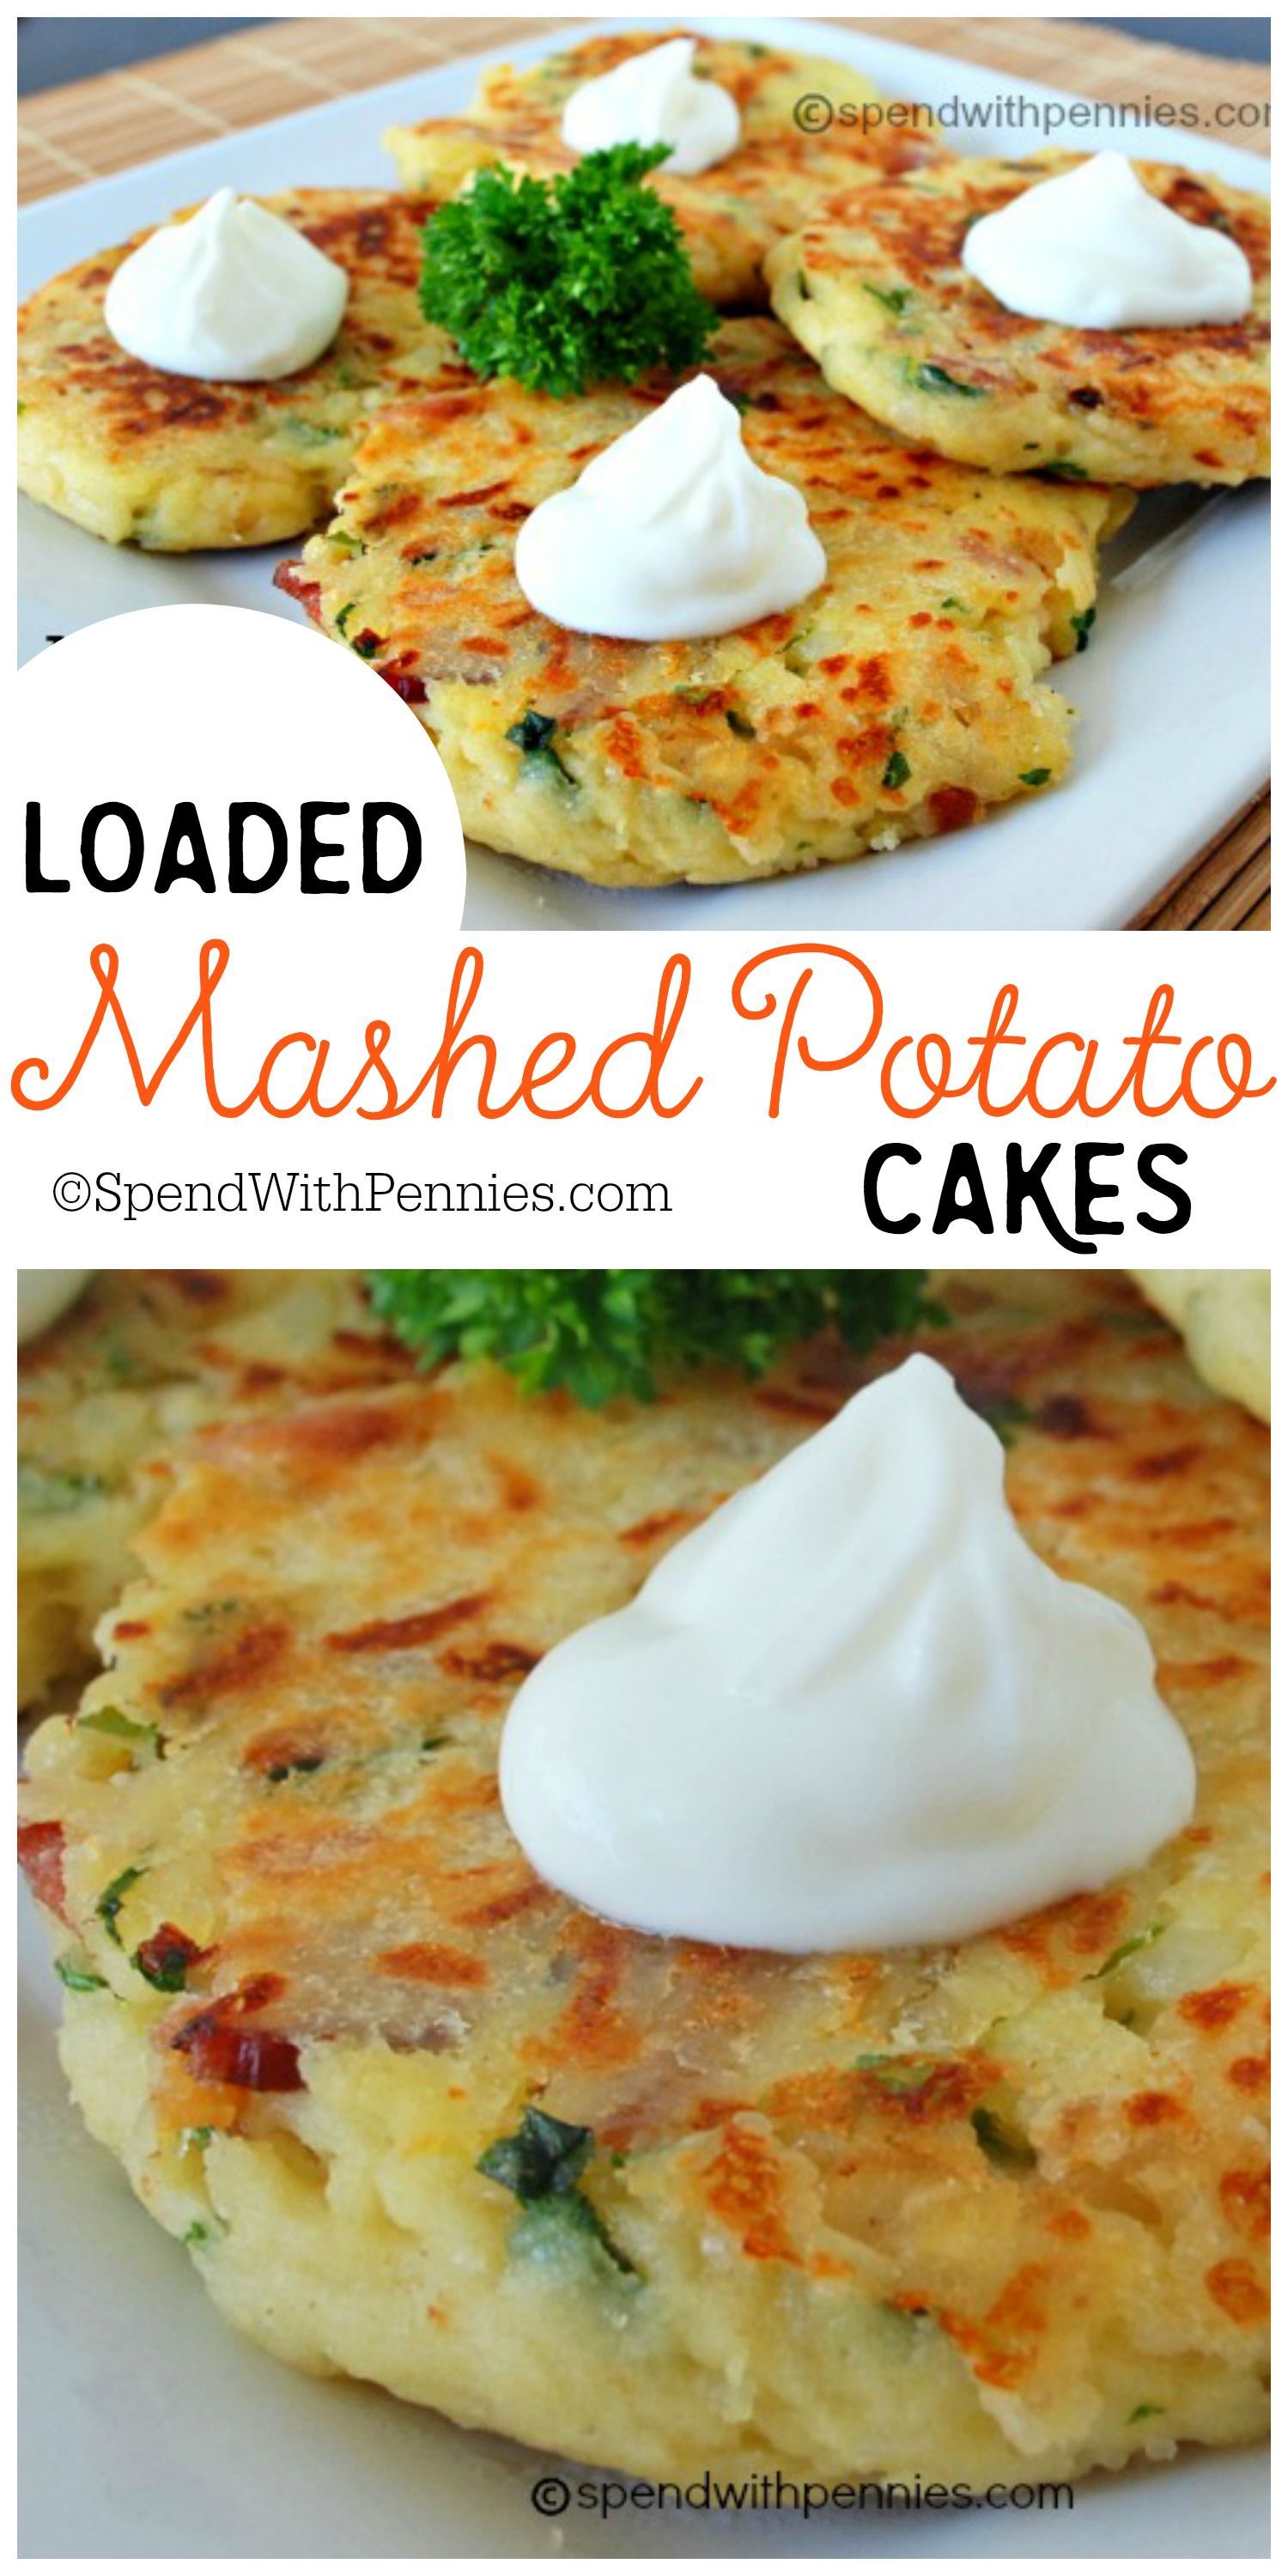 Loaded Mashed Potato Cakes!  These are an amazing way to use up mashed potatoes…  and you can add so many delicious things to